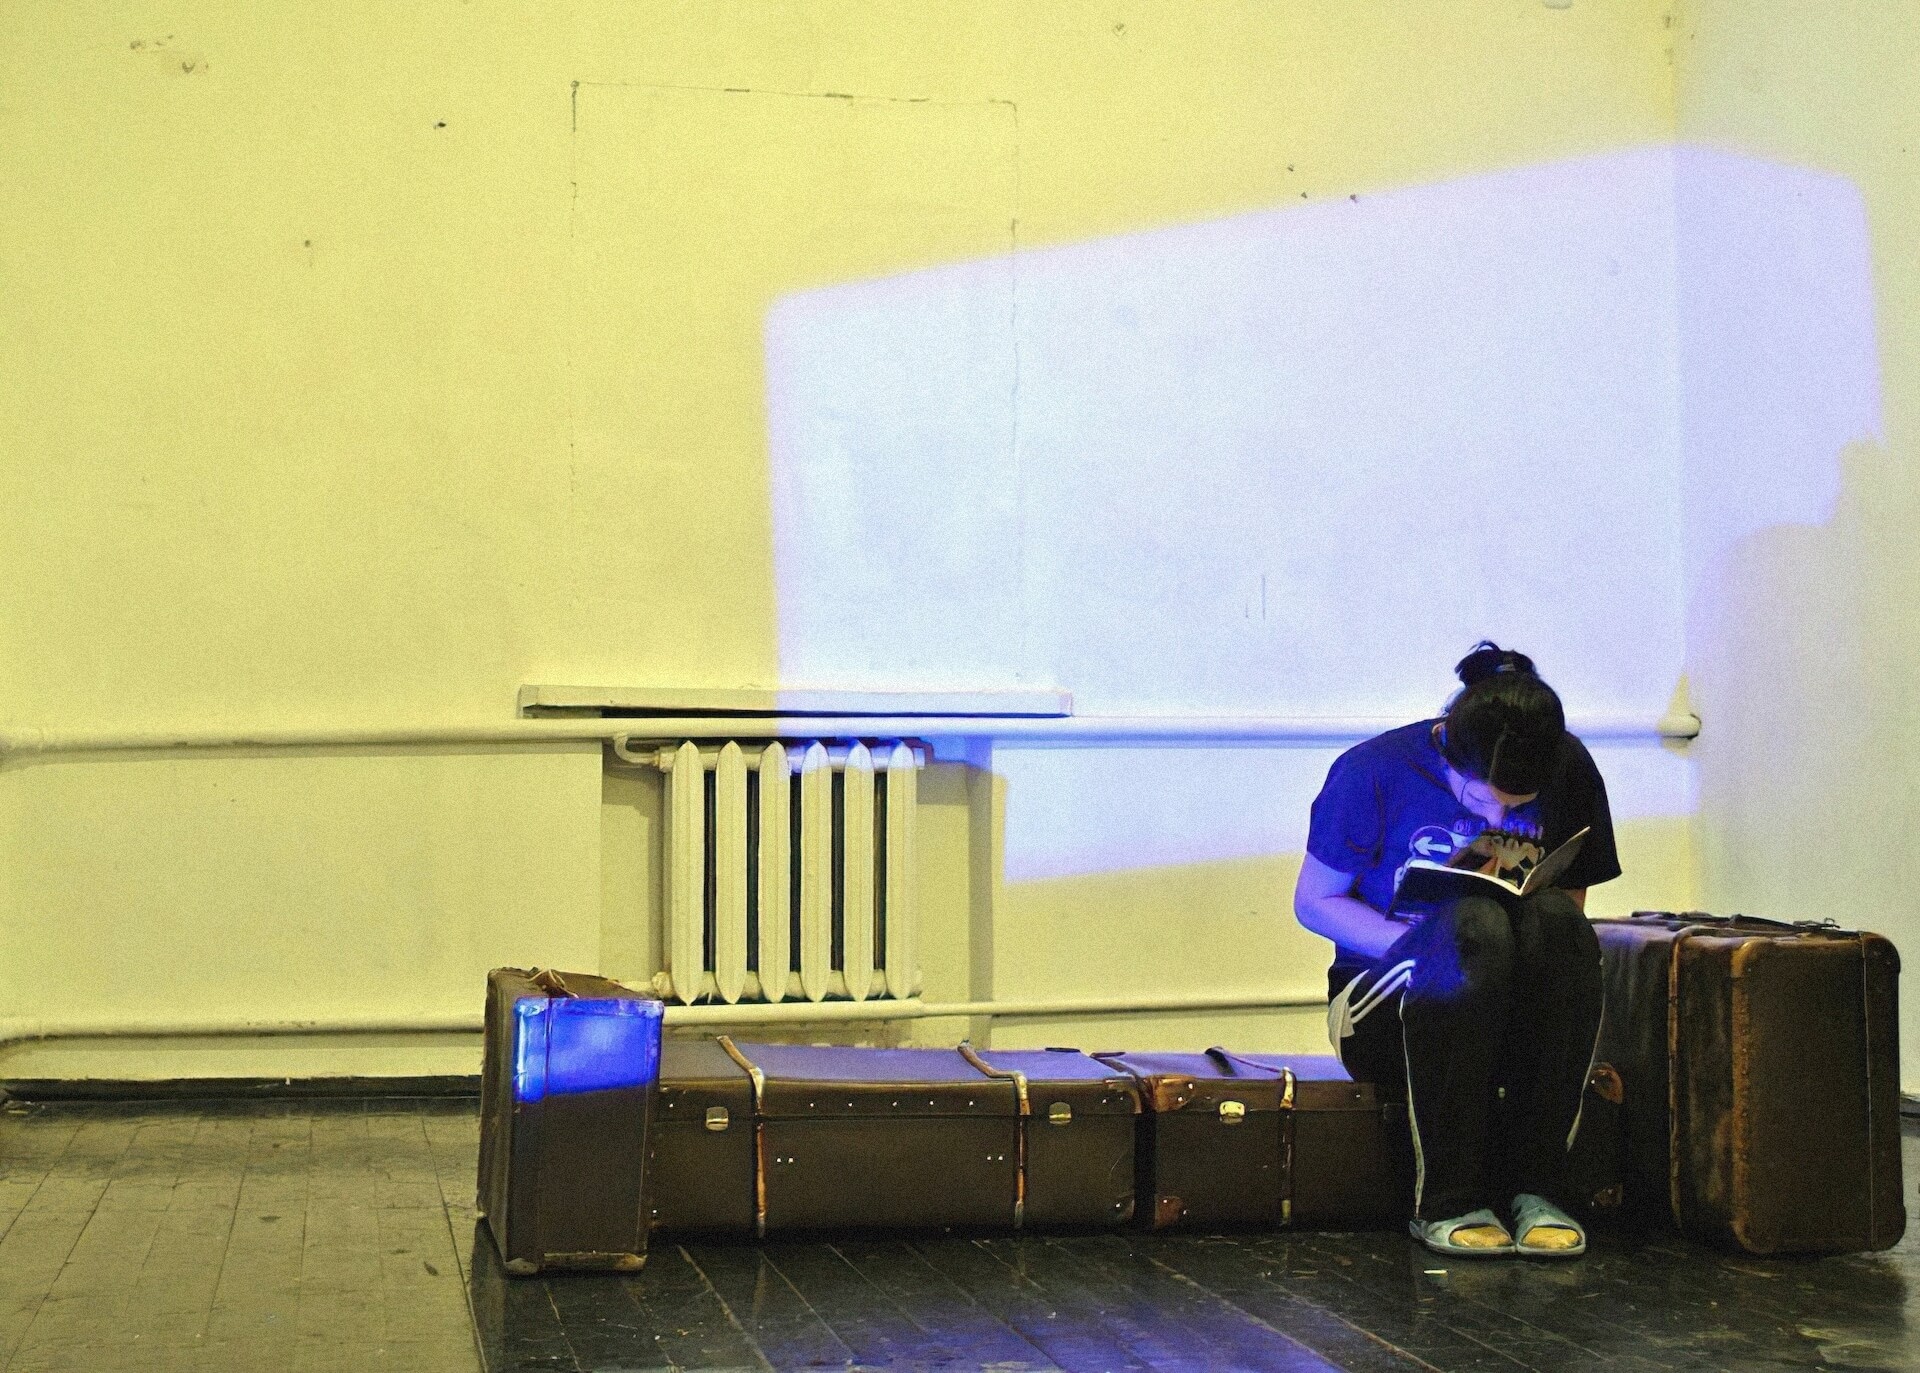 A line of luggage is sitting in an otherwise empty room. Dim blue light is shining on the wall like it's coming from a window. One performer is sitting on a luggage and is reading a book.